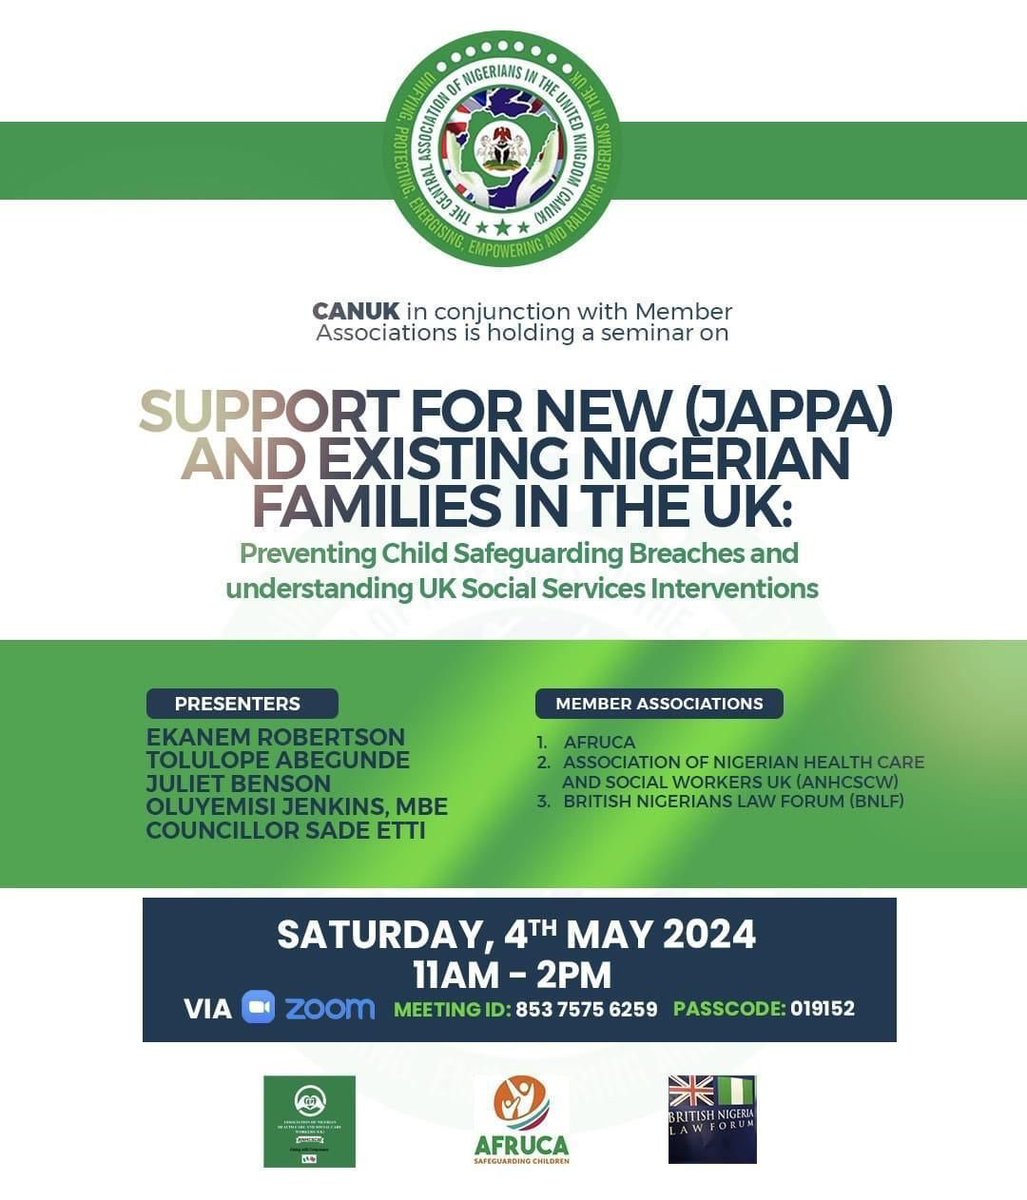 Join us @afruca, Central Association of Nigerians in the UK, other partners at our event: Support for Japa and Existing Nigerian Families in the UK: Preventing Child Safeguarding Breaches and understanding UK Social Services Interventions Saturday, 4 May 2024 at 11am. On Zoom